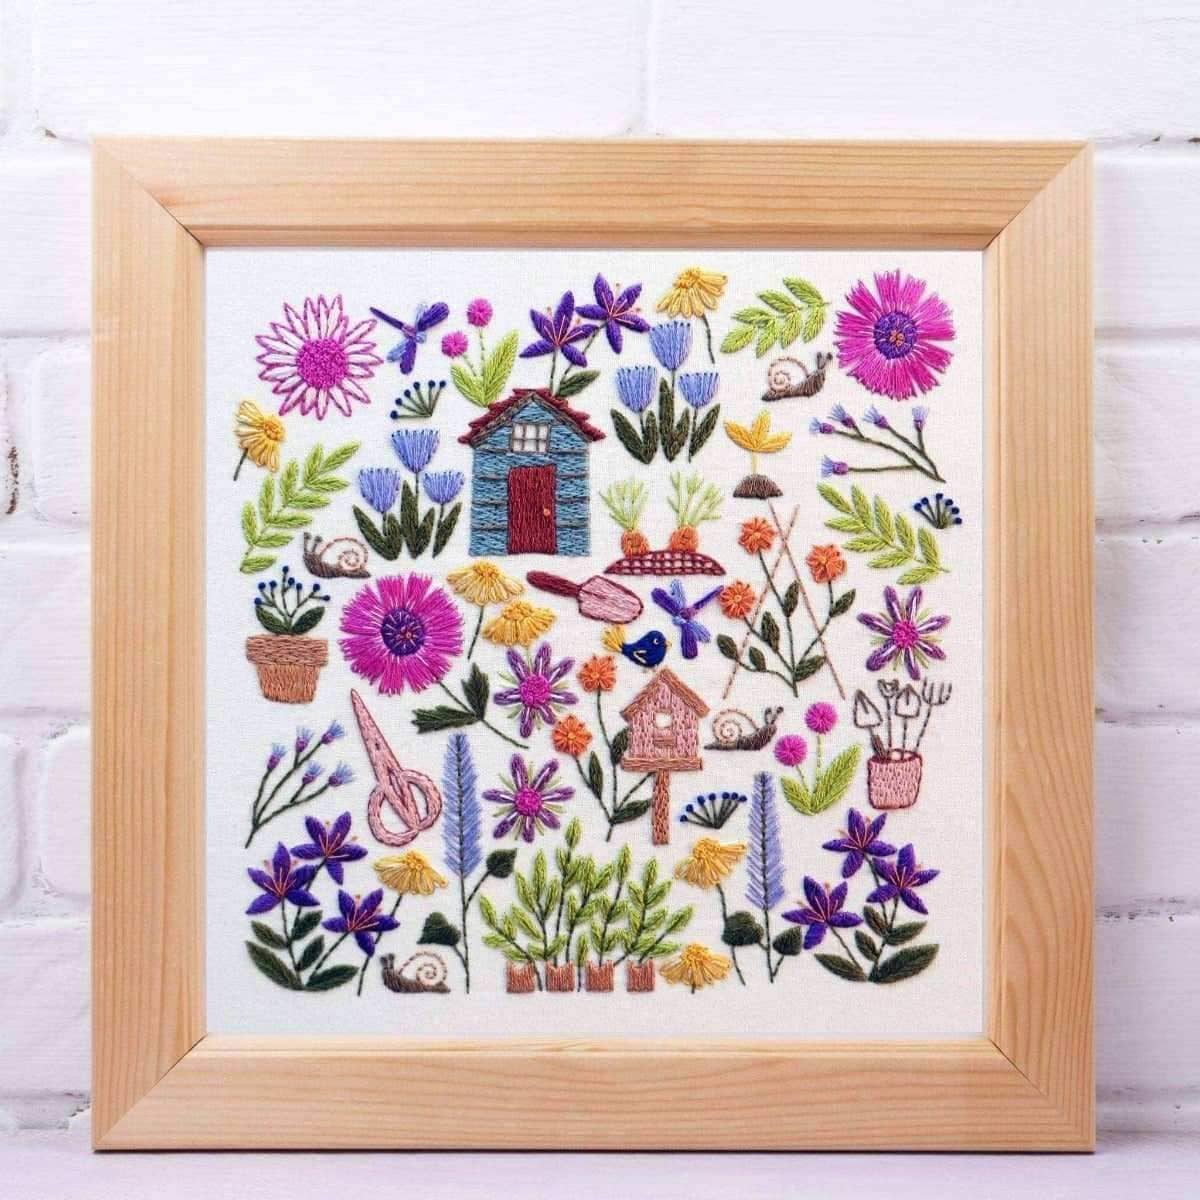 How does your Garden Grow, Pre Printed Embroidery Fabric Panel PLUS PDF Pattern , Pre Printed Fabric Pattern , StitchDoodles , bird embroidery, Embroidery, embroidery hoop, embroidery hoop kit, embroidery kits for beginners, embroidery pattern, garden embroidery, hand embroidery, hand embroidery fabric, hand embroidery kit, hand embroidery seat frame, nurge embroidery hoop, PDF pattern, Printed Pattern, unique embroidery kits , StitchDoodles , shop.stitchdoodles.com